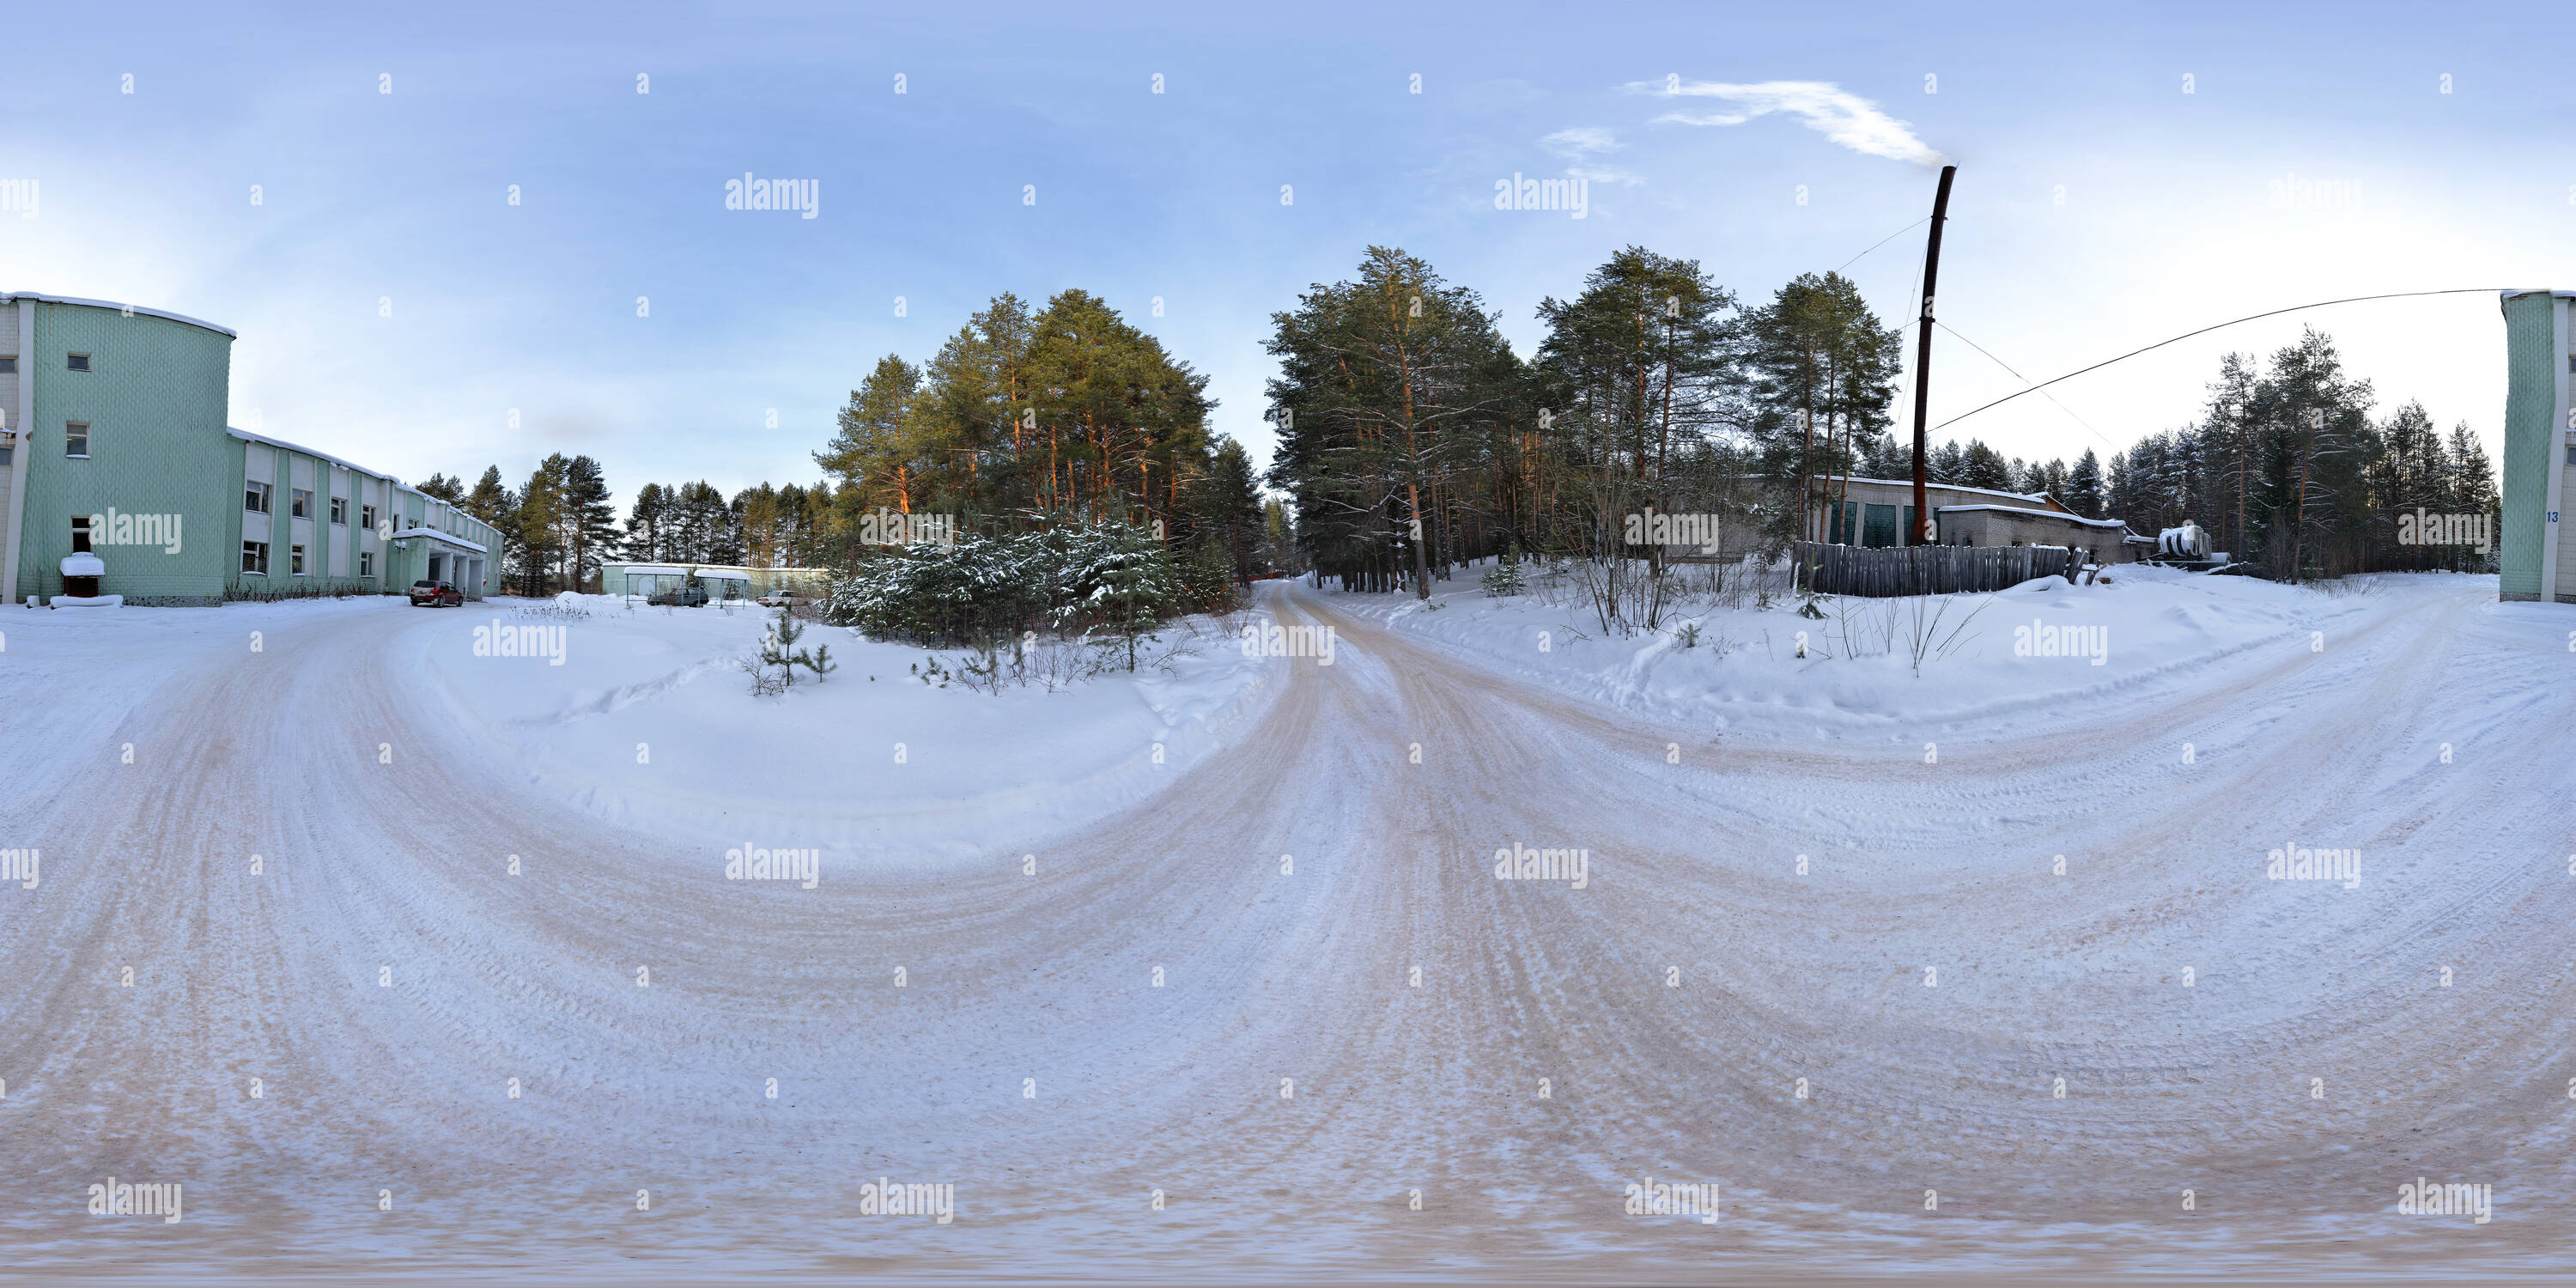 360° view of Near the former dispensary - Alamy